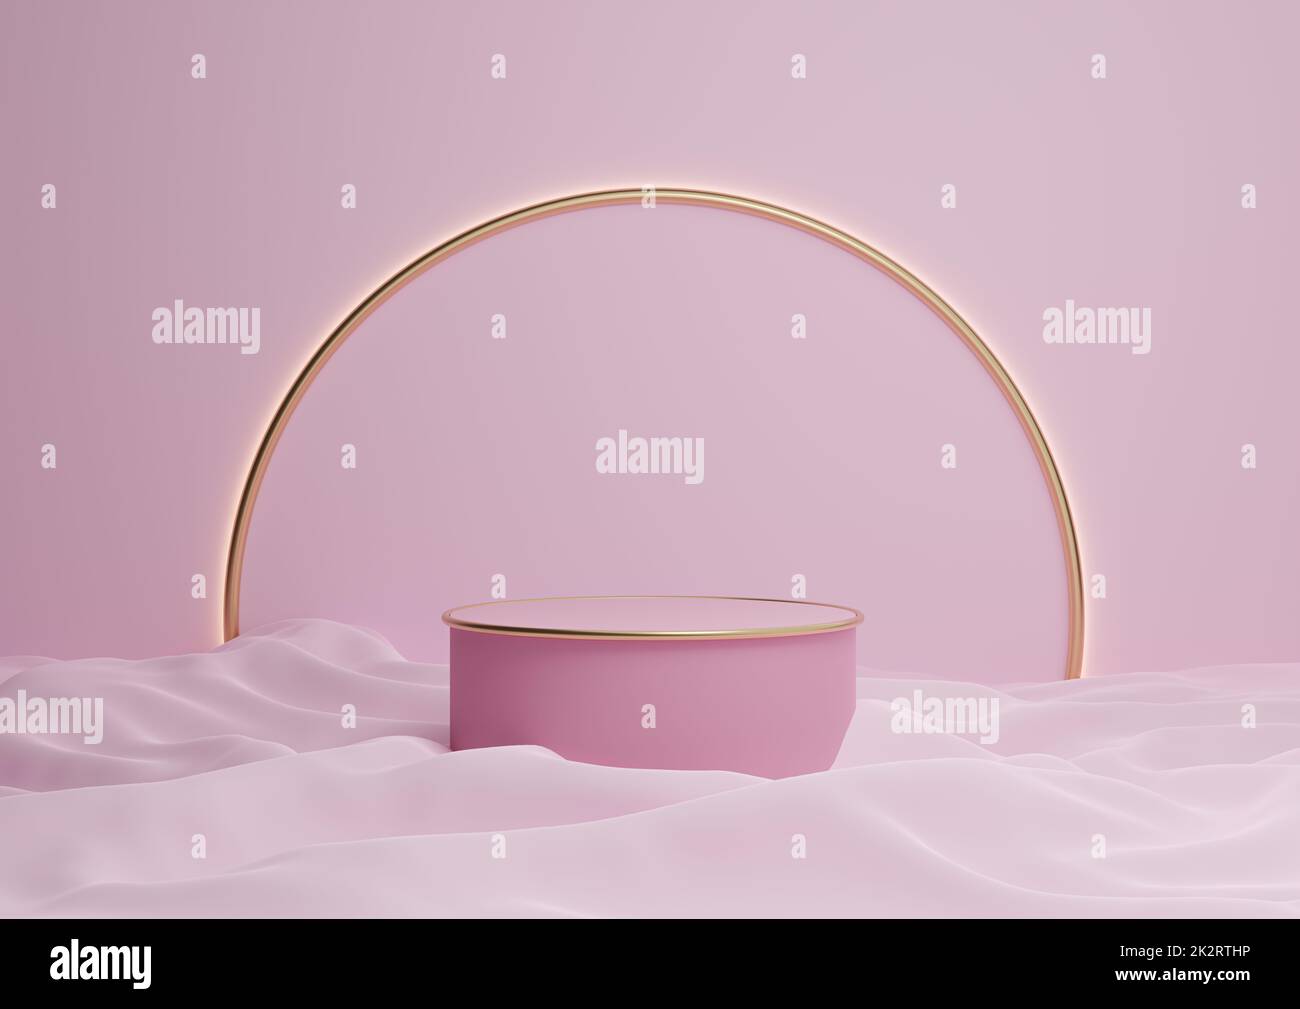 Light, pastel, lavender pink 3D rendering luxurious product display podium or stand minimal composition with golden arch line in background and light Stock Photo